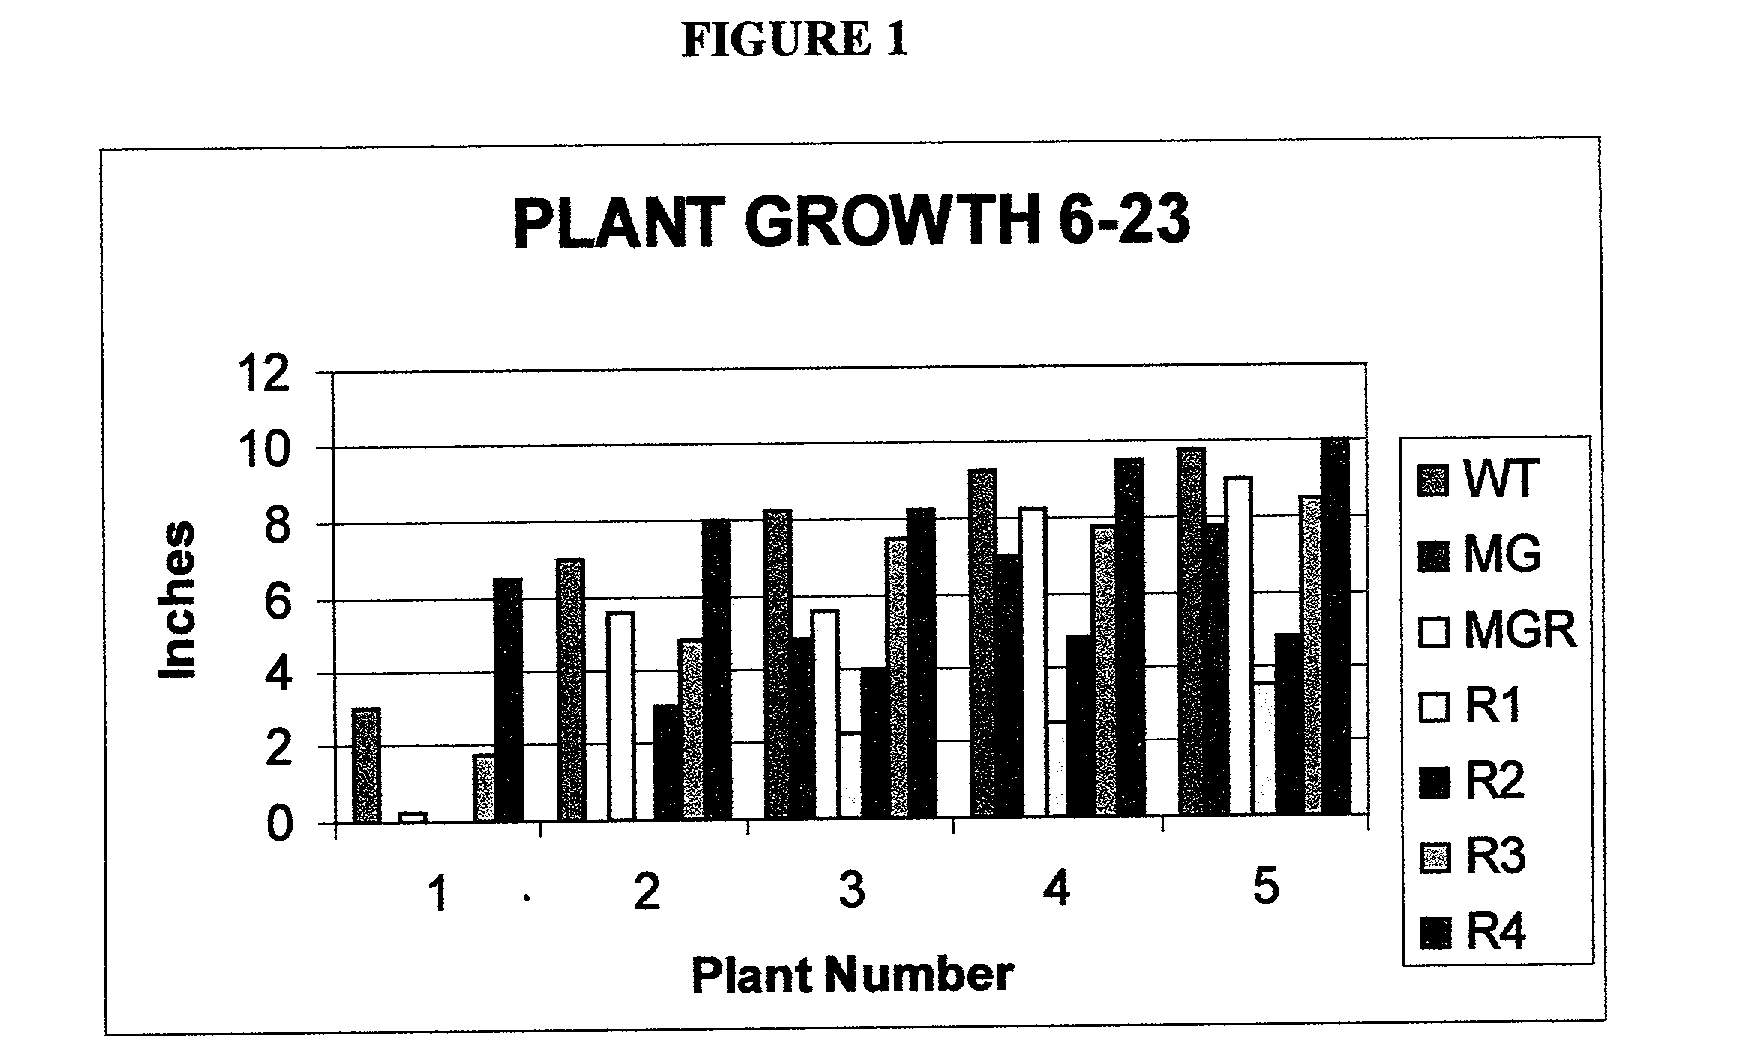 Ribose aids in plant hardening, in the recovery following transplantation shock, and enhances plant growth and yield and root growth